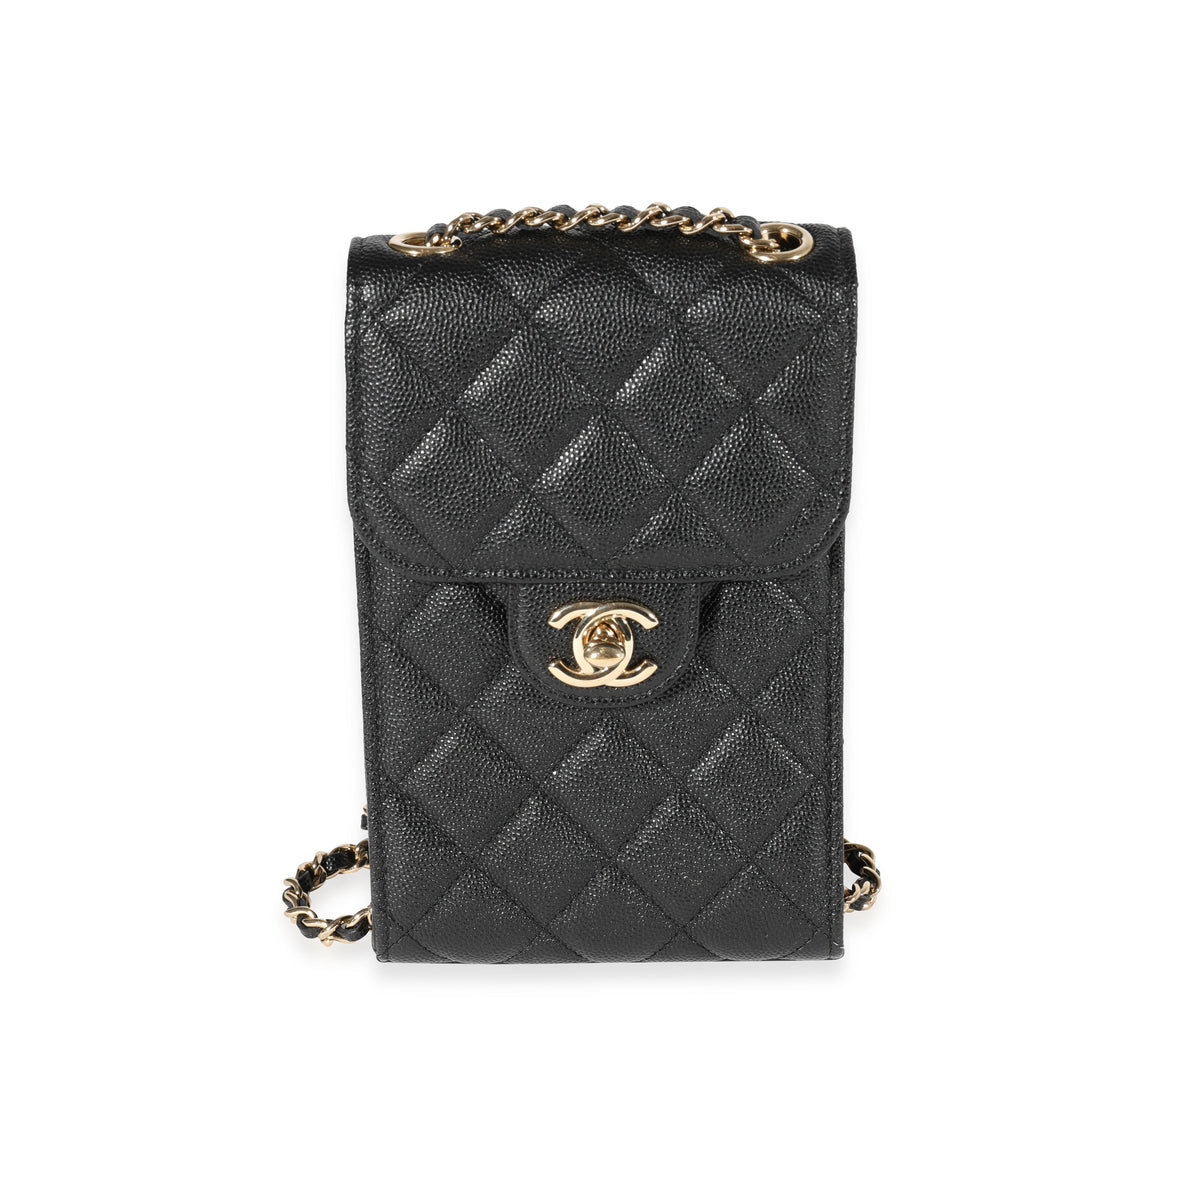 Buy Chanel CHANEL Size:- Phone Pouch with Boy Chanel Caviar Skin Card Case  from Japan - Buy authentic Plus exclusive items from Japan